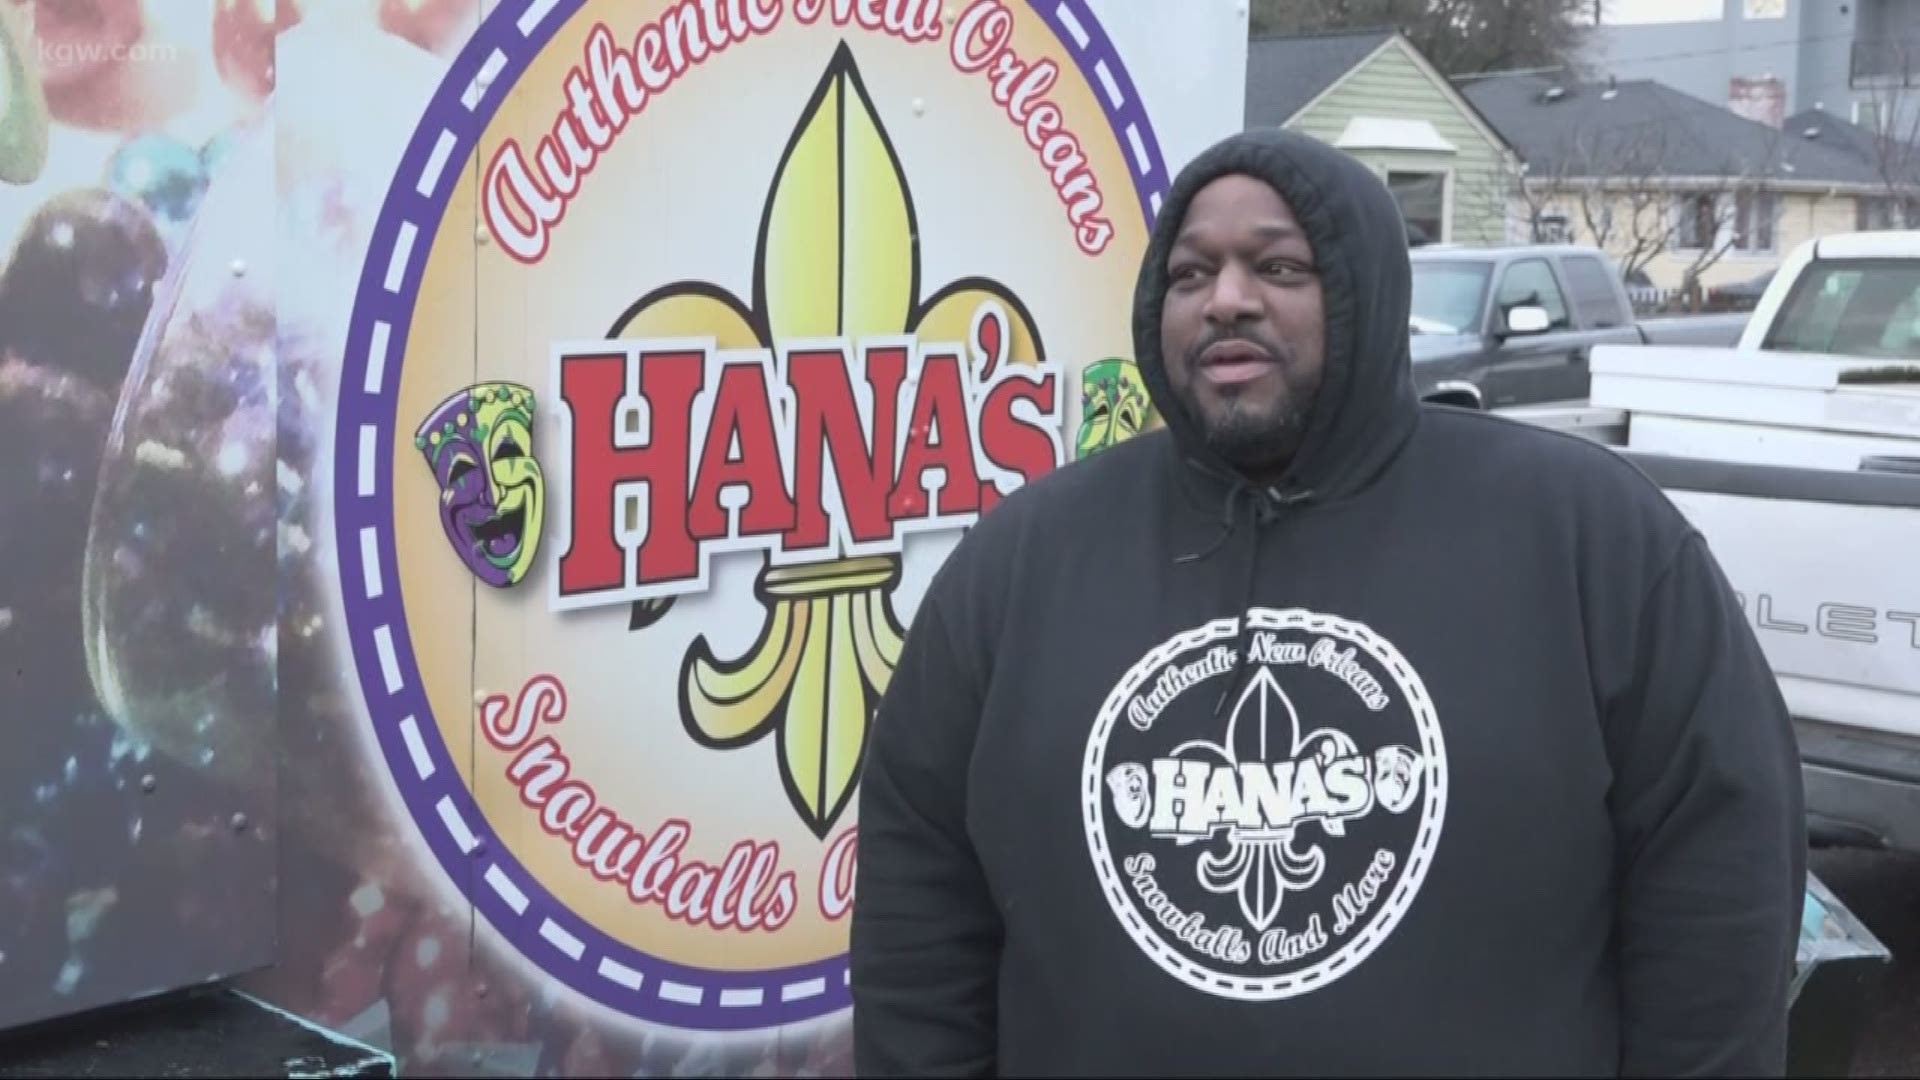 Alan Bell, the owner of New Orleans food cart Hana's, says it could take him months to start serving food again after his generator was stolen.